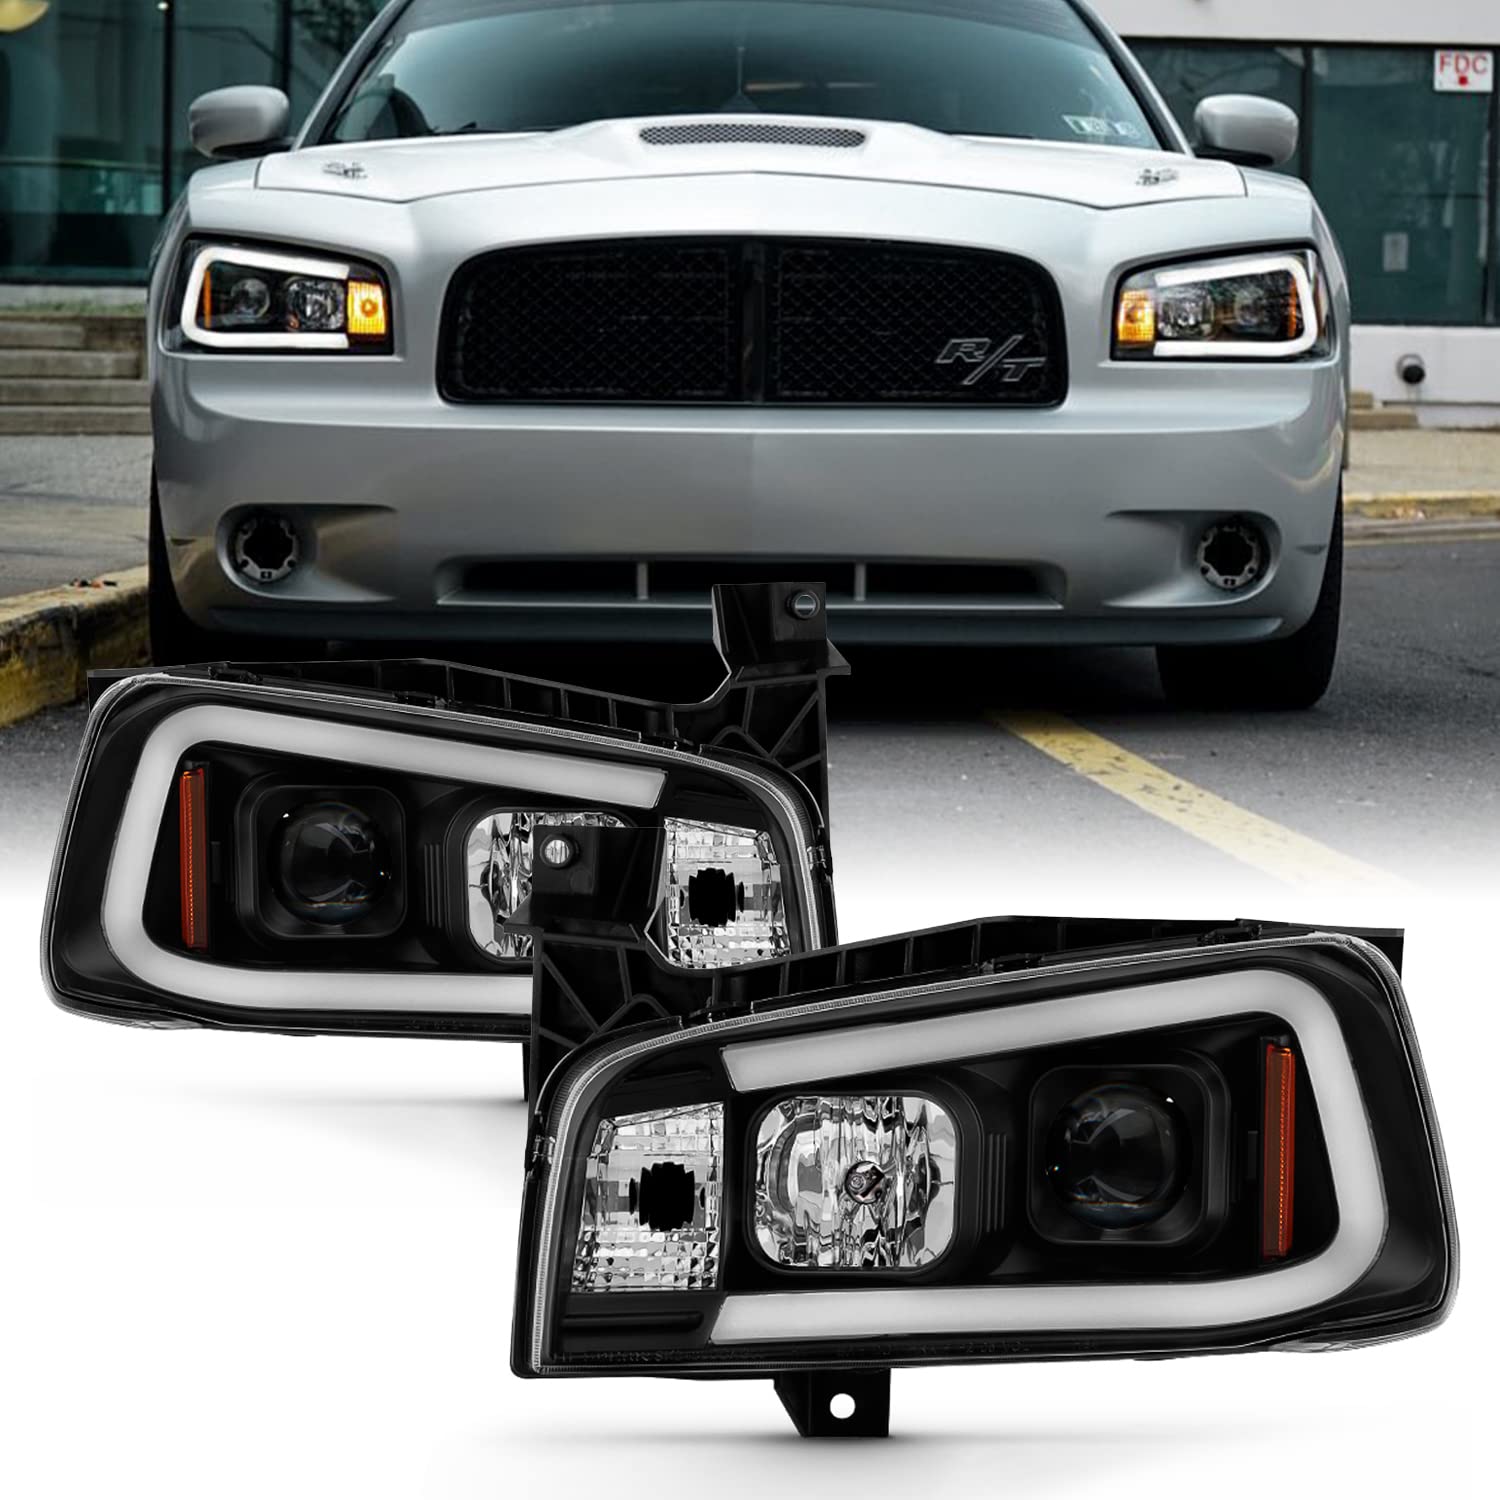 Amazon.com: AKKON - For 2006-10 Dodge Charger LED Daytime Running Lamp Bar  Projector Headlights Black Housing Clear Lens Halogen Model Only :  Automotive